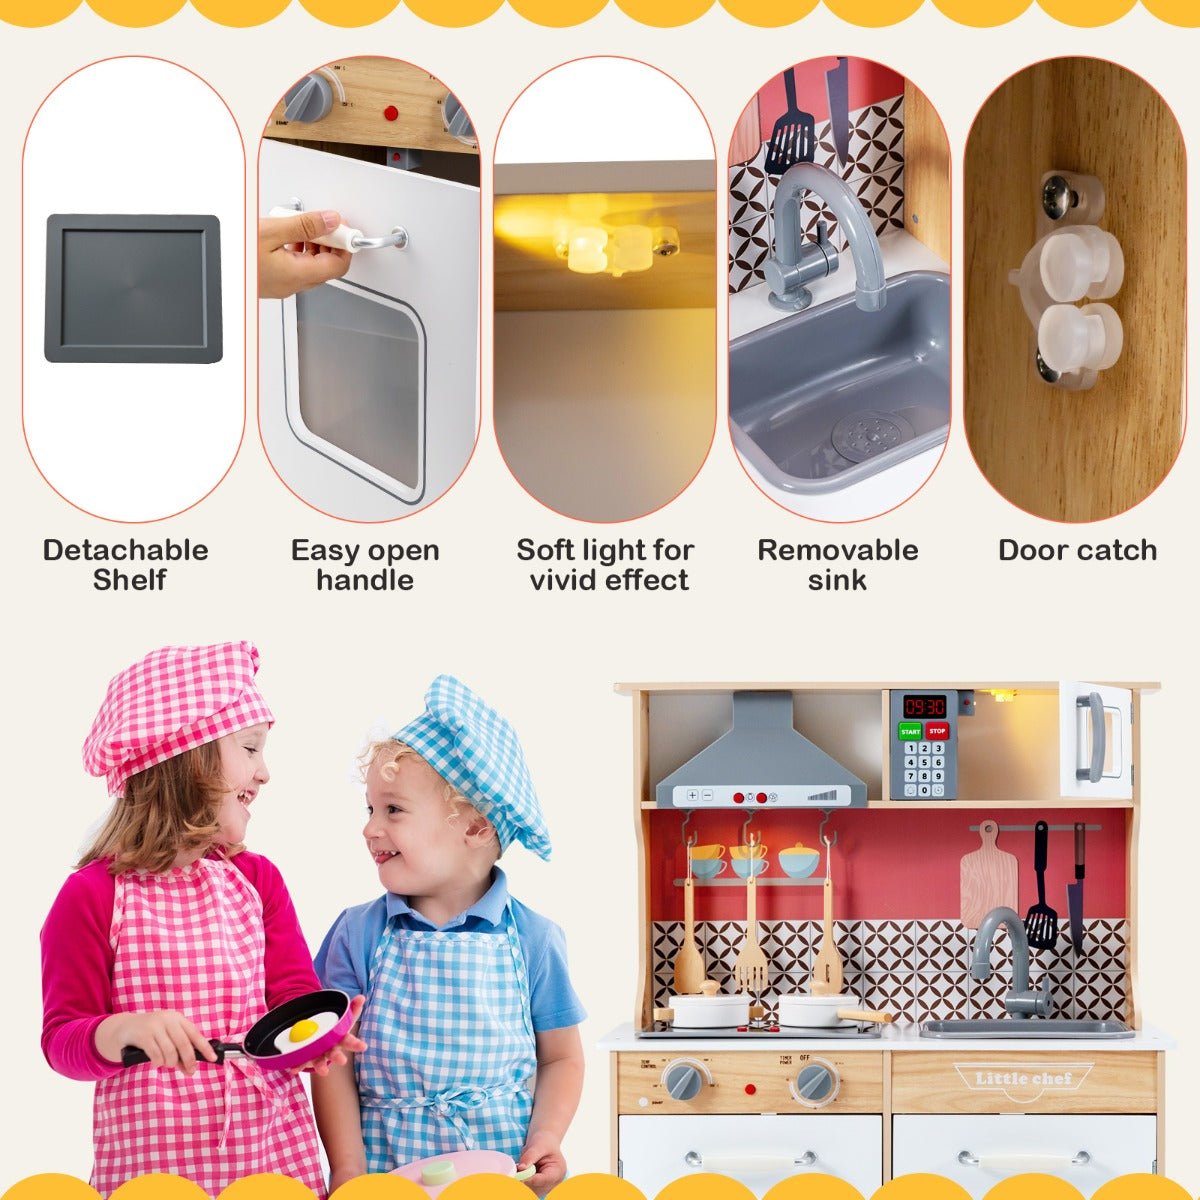 Wooden Kids Kitchen Set with Range Hood - Fun and Educational